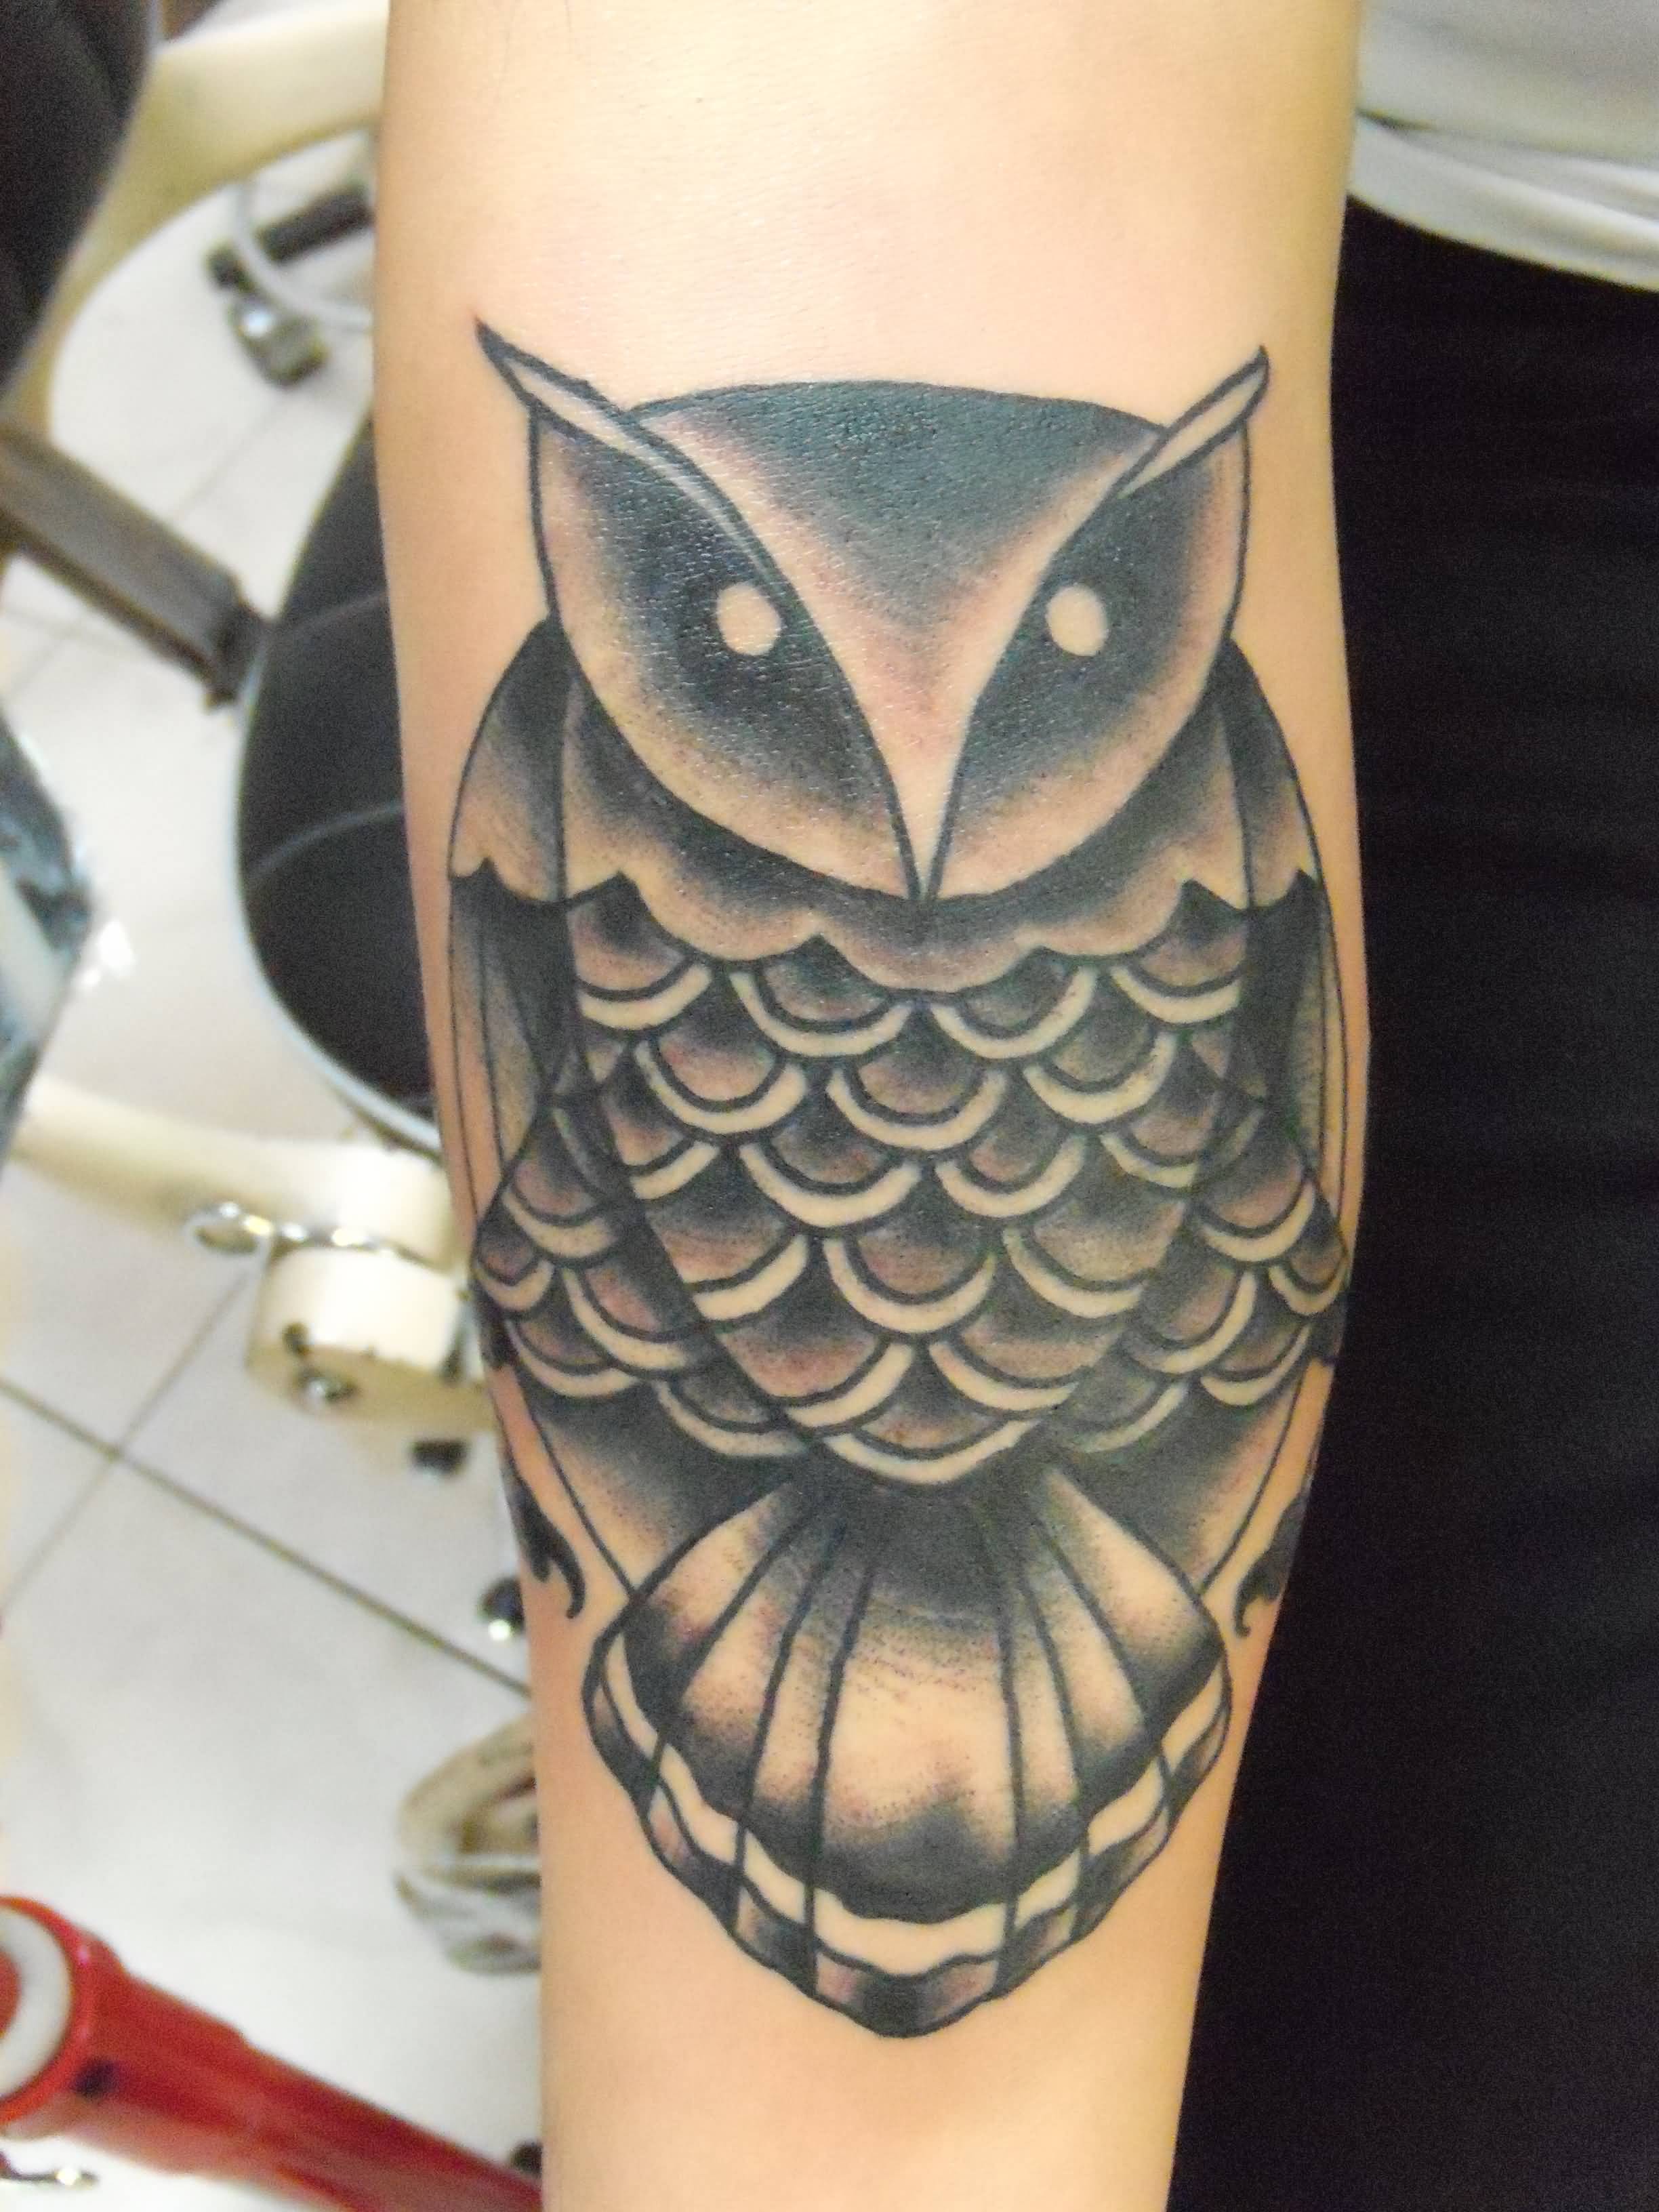 Black Ink Traditional Owl Tattoo On Forearm